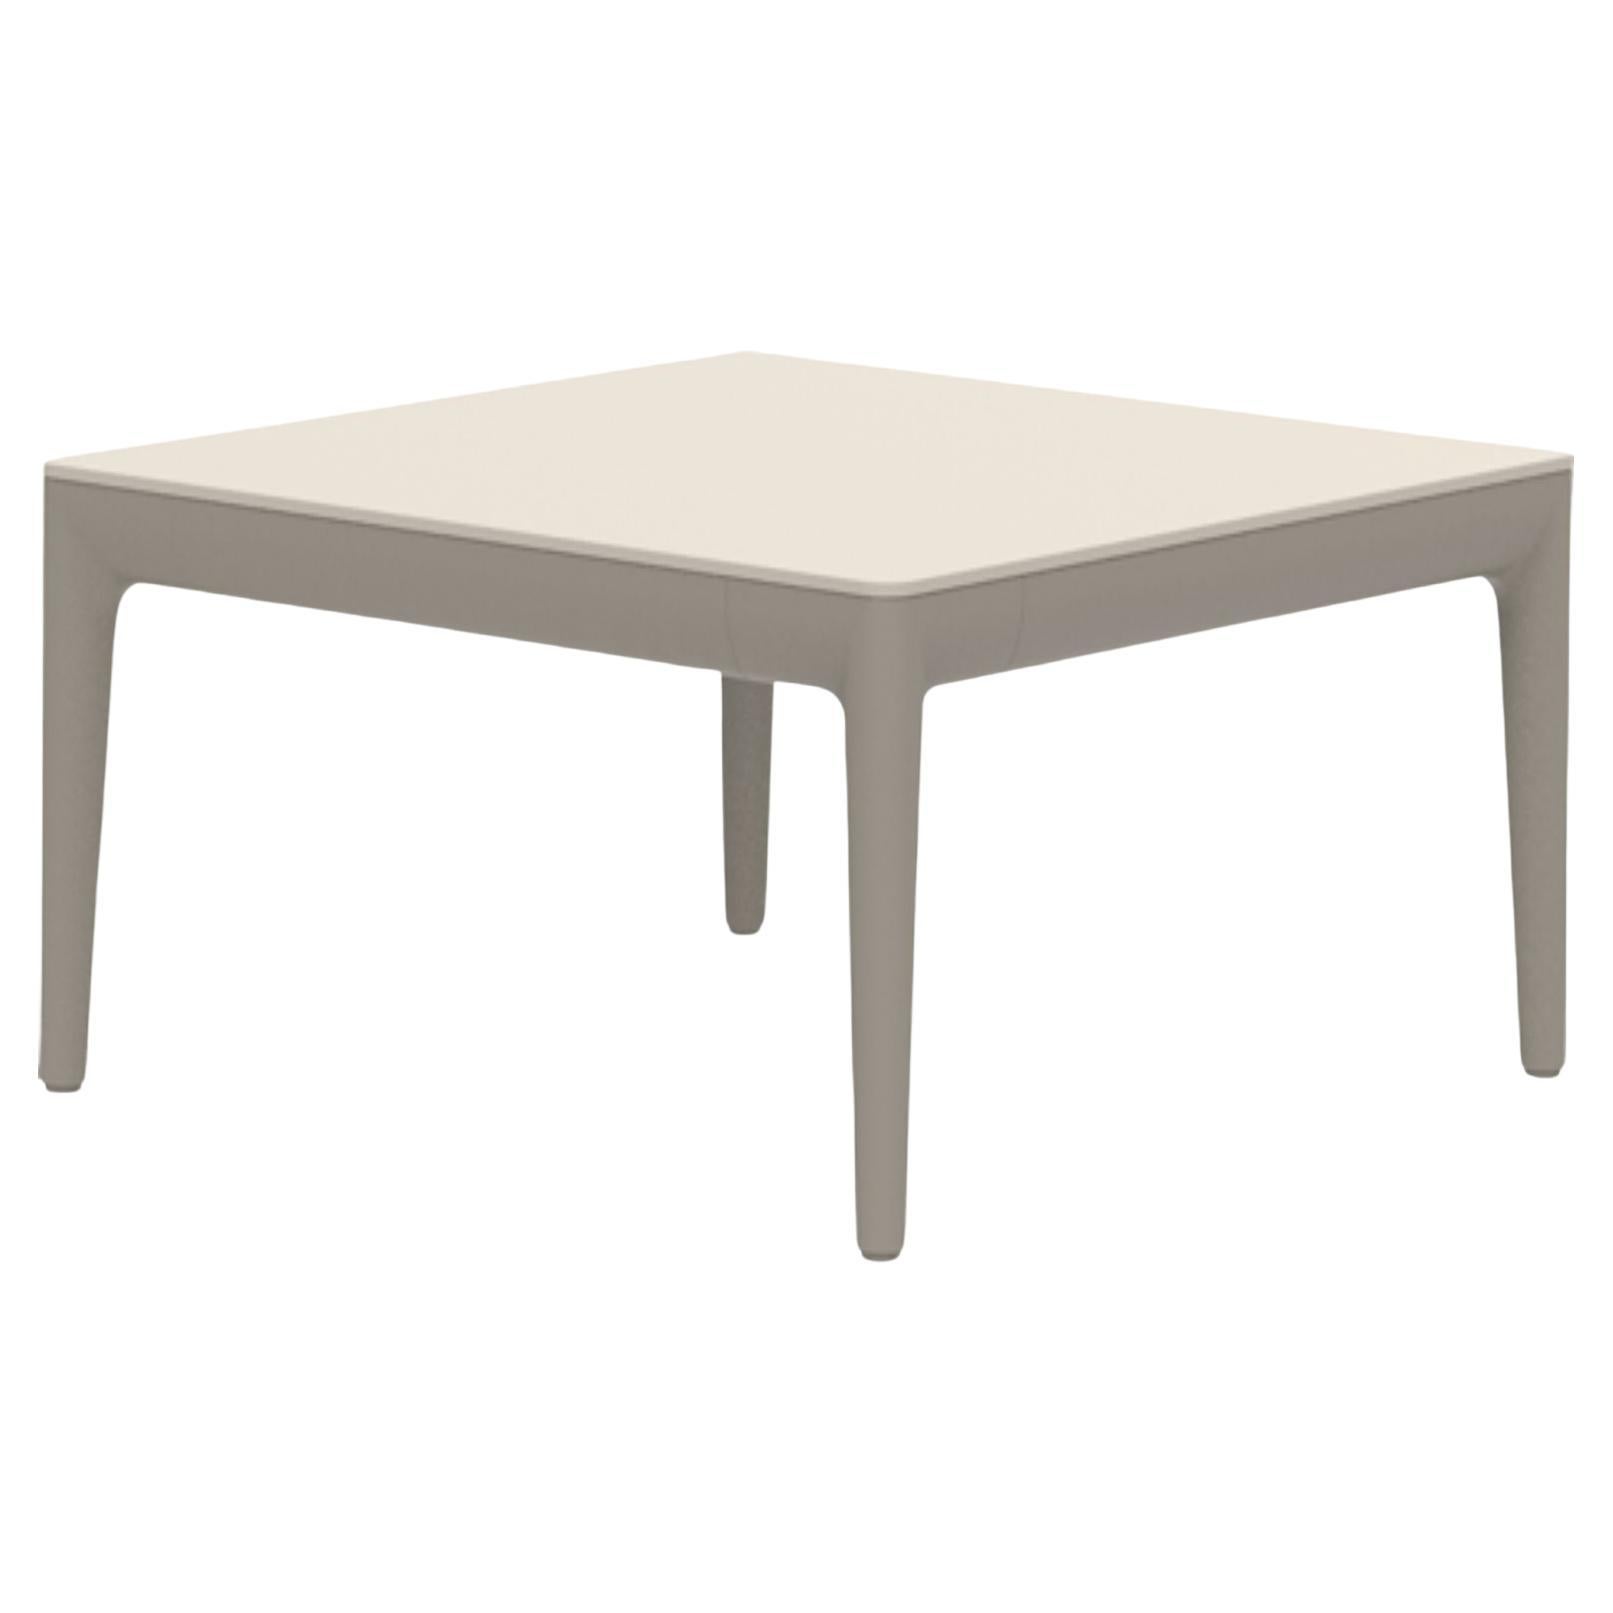 Ribbons Cream 50 Coffee Table by Mowee For Sale